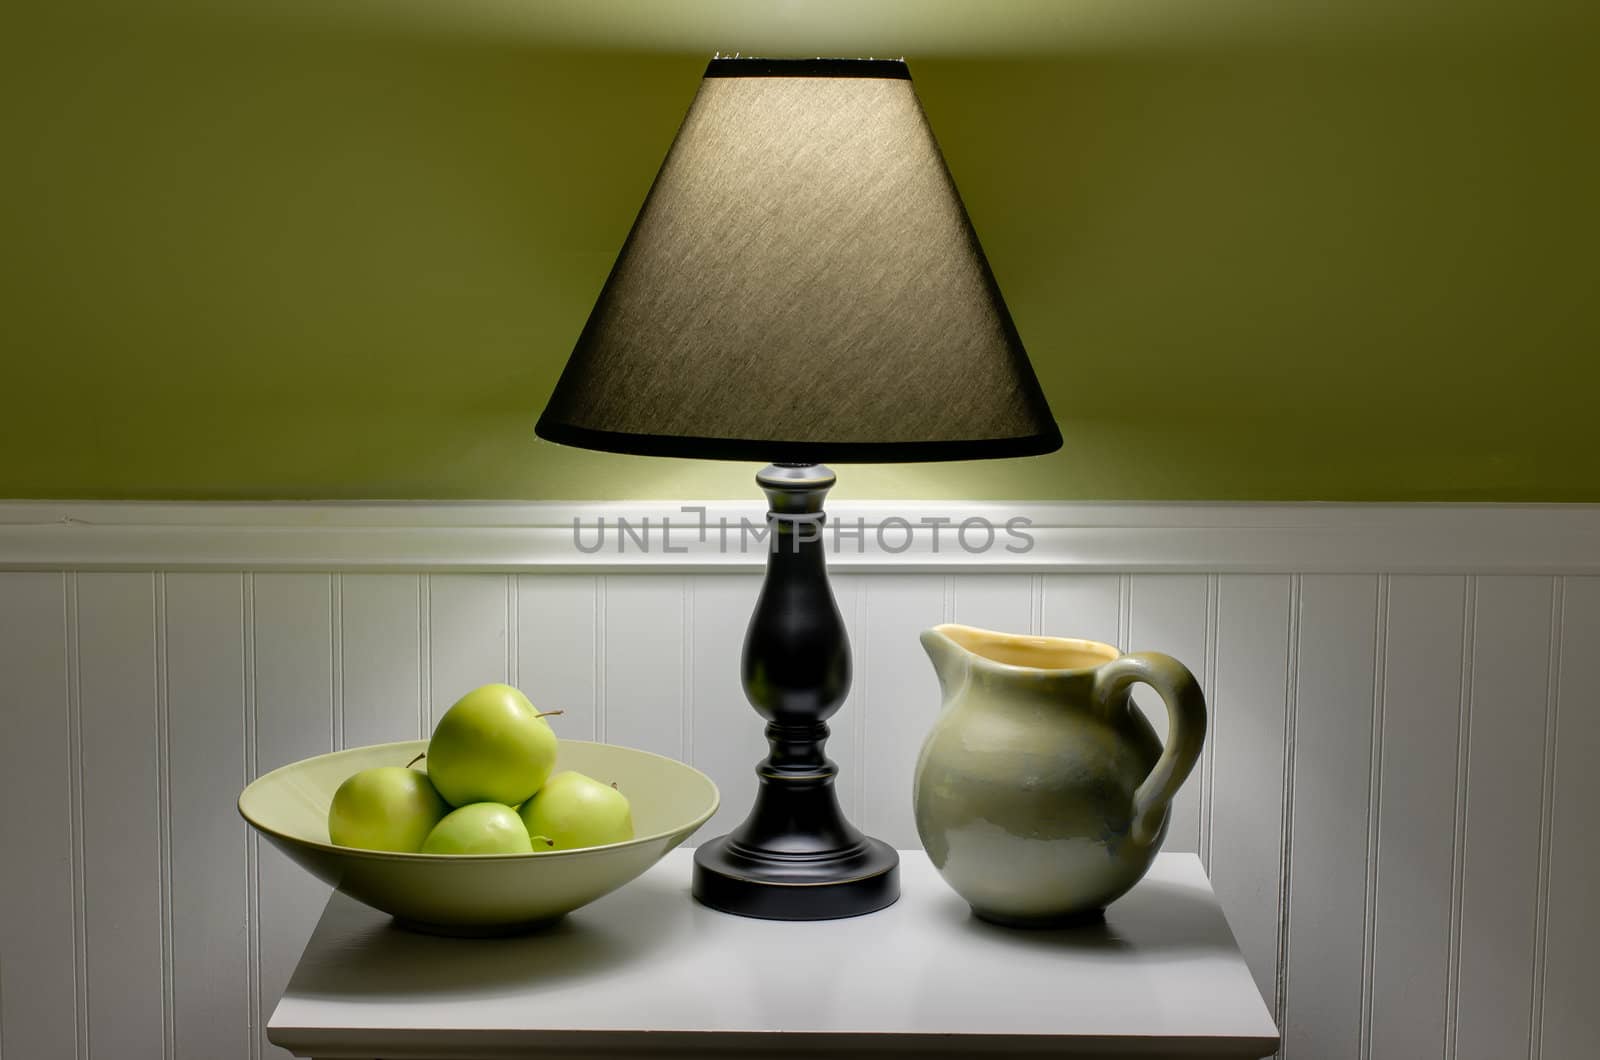 Bowl of green apples, lamp and pitcher on table.  Scene is illuminated only by soft light from lamp.